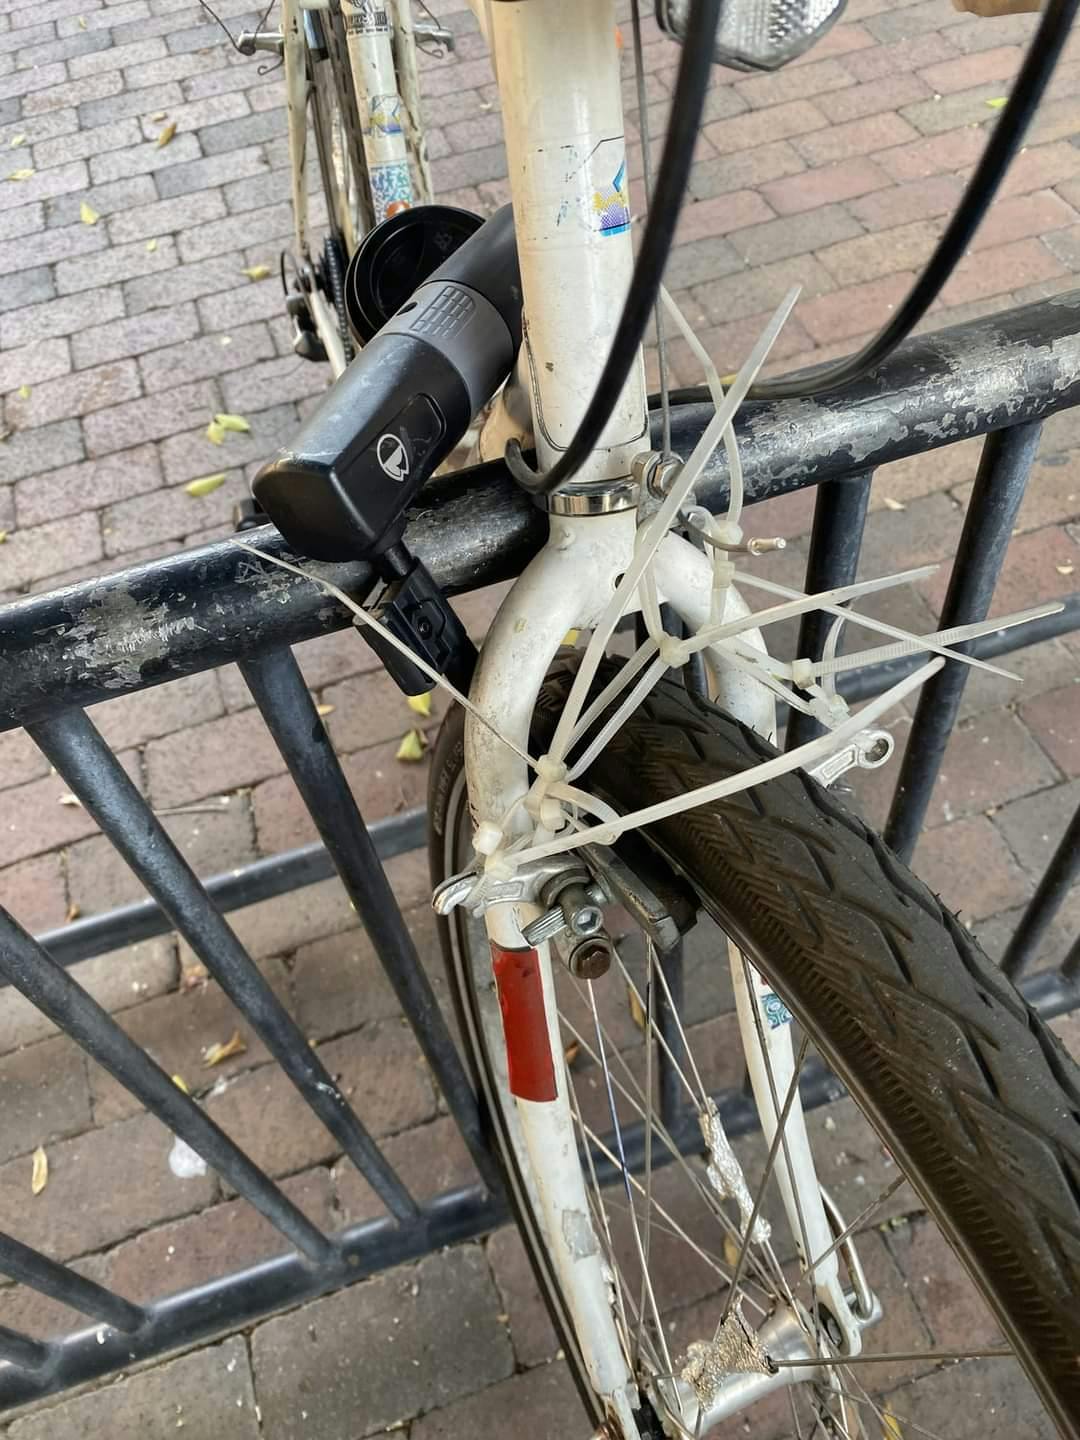 (Found on a Facebook page) lightweight v-brakes 